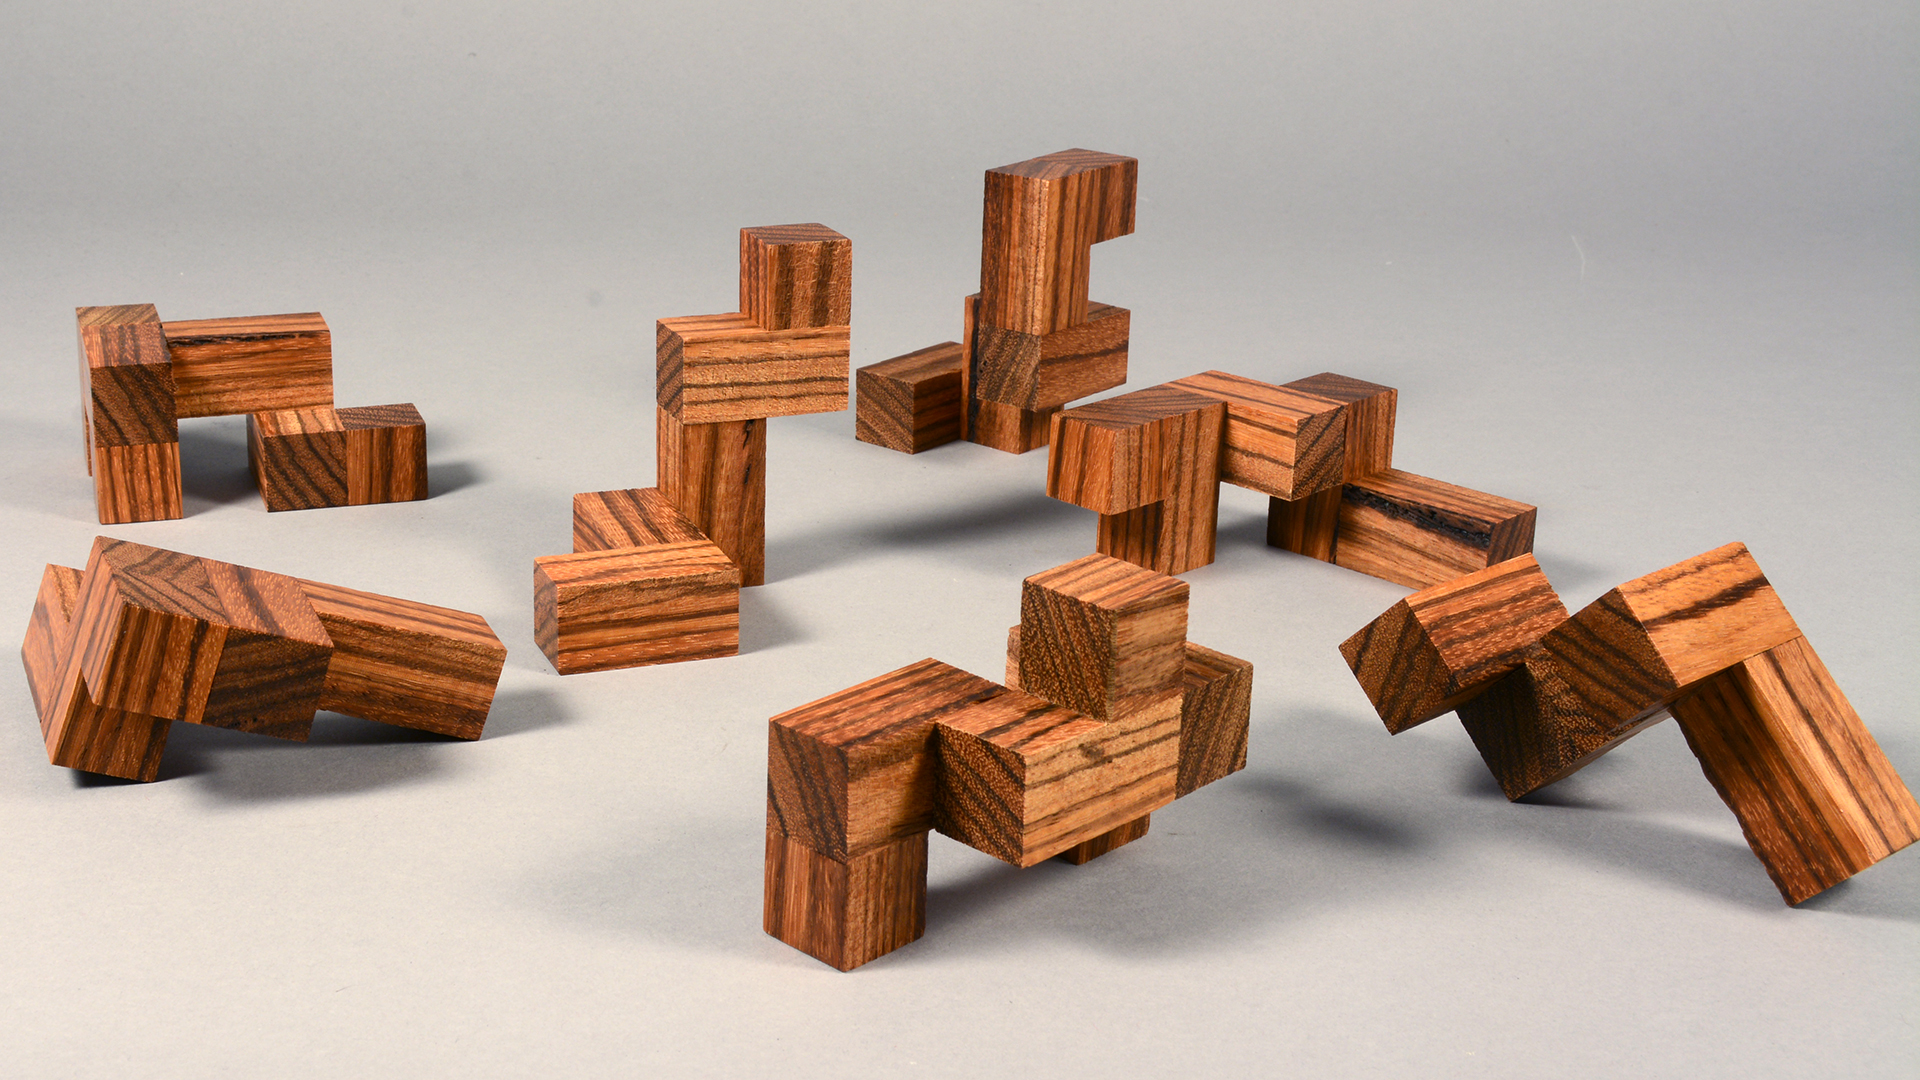 Stained wood 3D geometric interlocking puzzle pieces scattered about